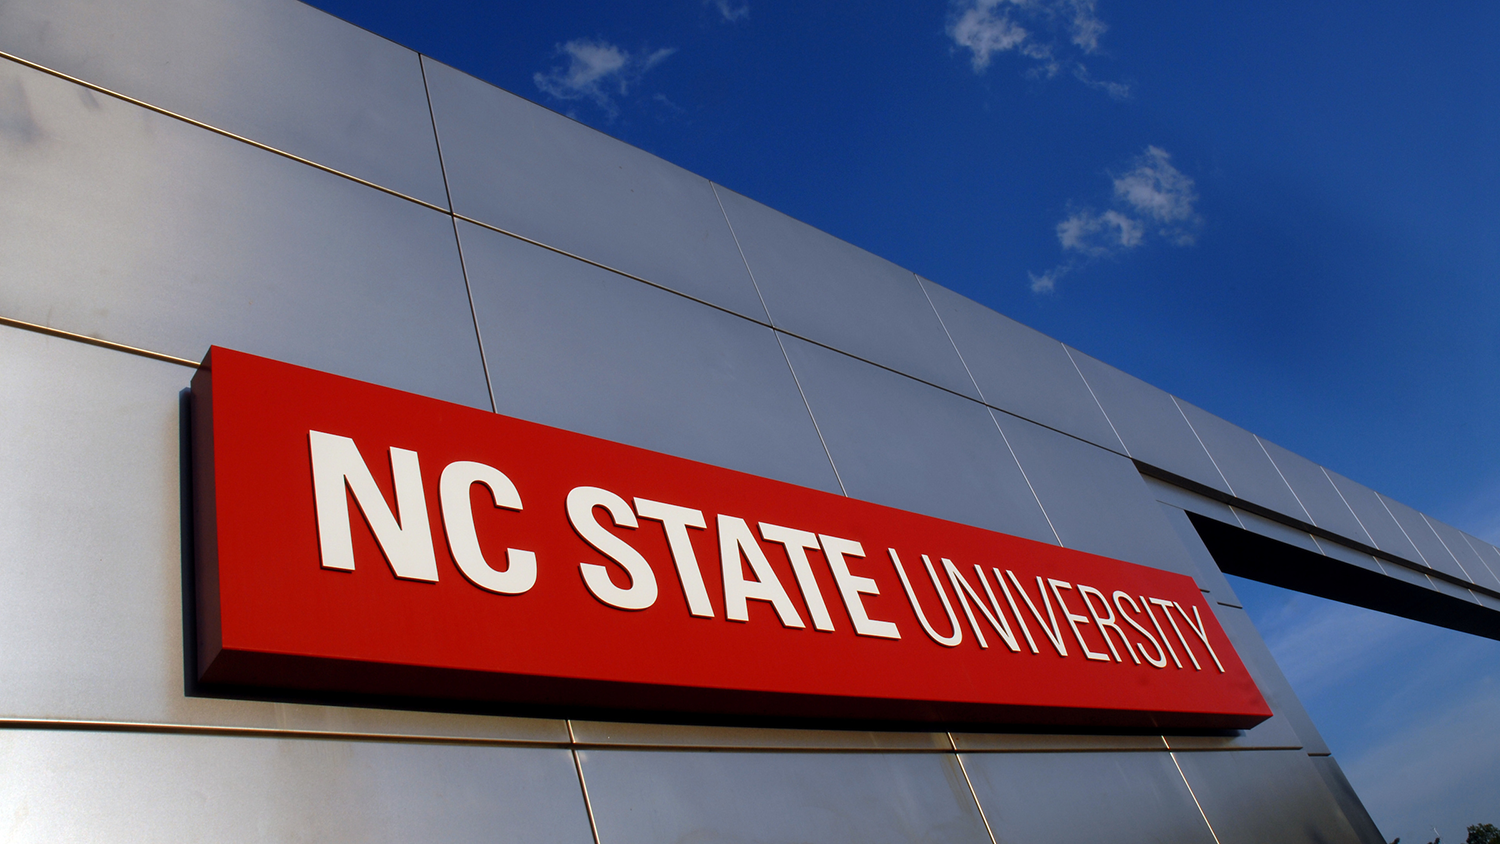 NC State campus gateway sign